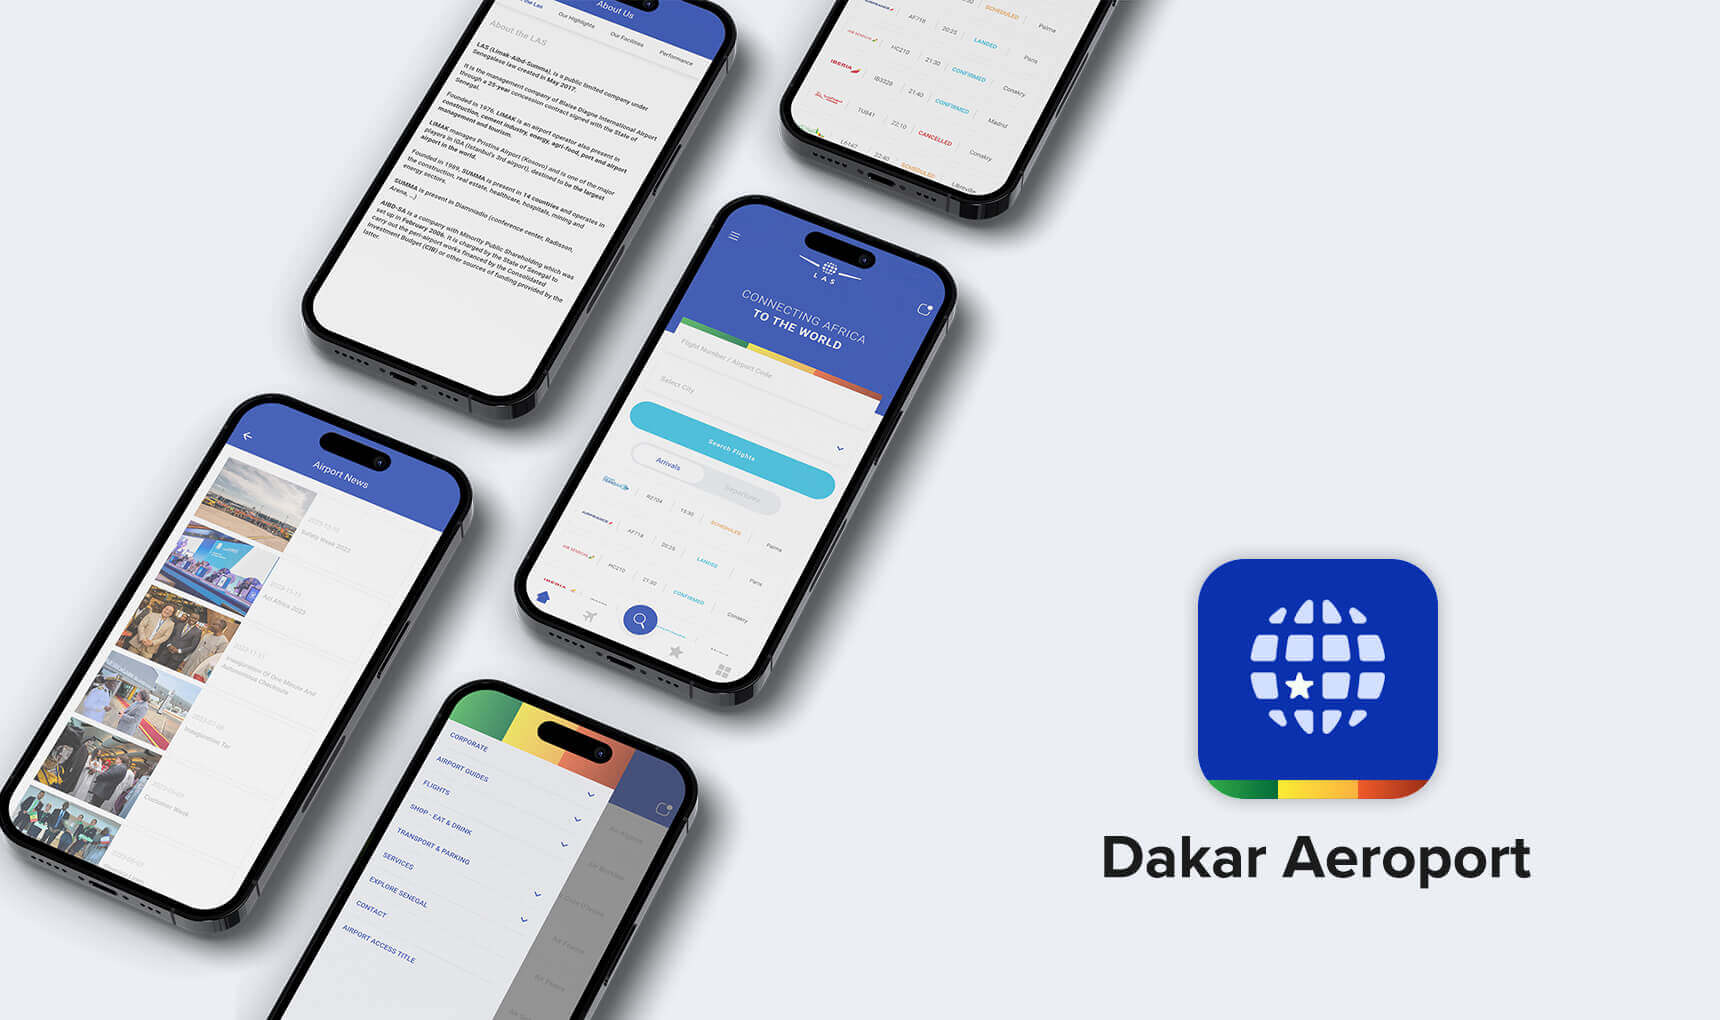 Dakar Aeroport-2 - wrinting 1-3 - web promo-5 - website-page-6 - app-mockup-7- home-page-8 - type-9 - color-10 - web-pages-11 - laptop-mockup-12 - mobil-page-13 - tablet-screen-14 - phone-tablet mockup-15 - web-pages-16 - imac-mockup-17 - web-pages-1-18 - writing app-19 - app-cover